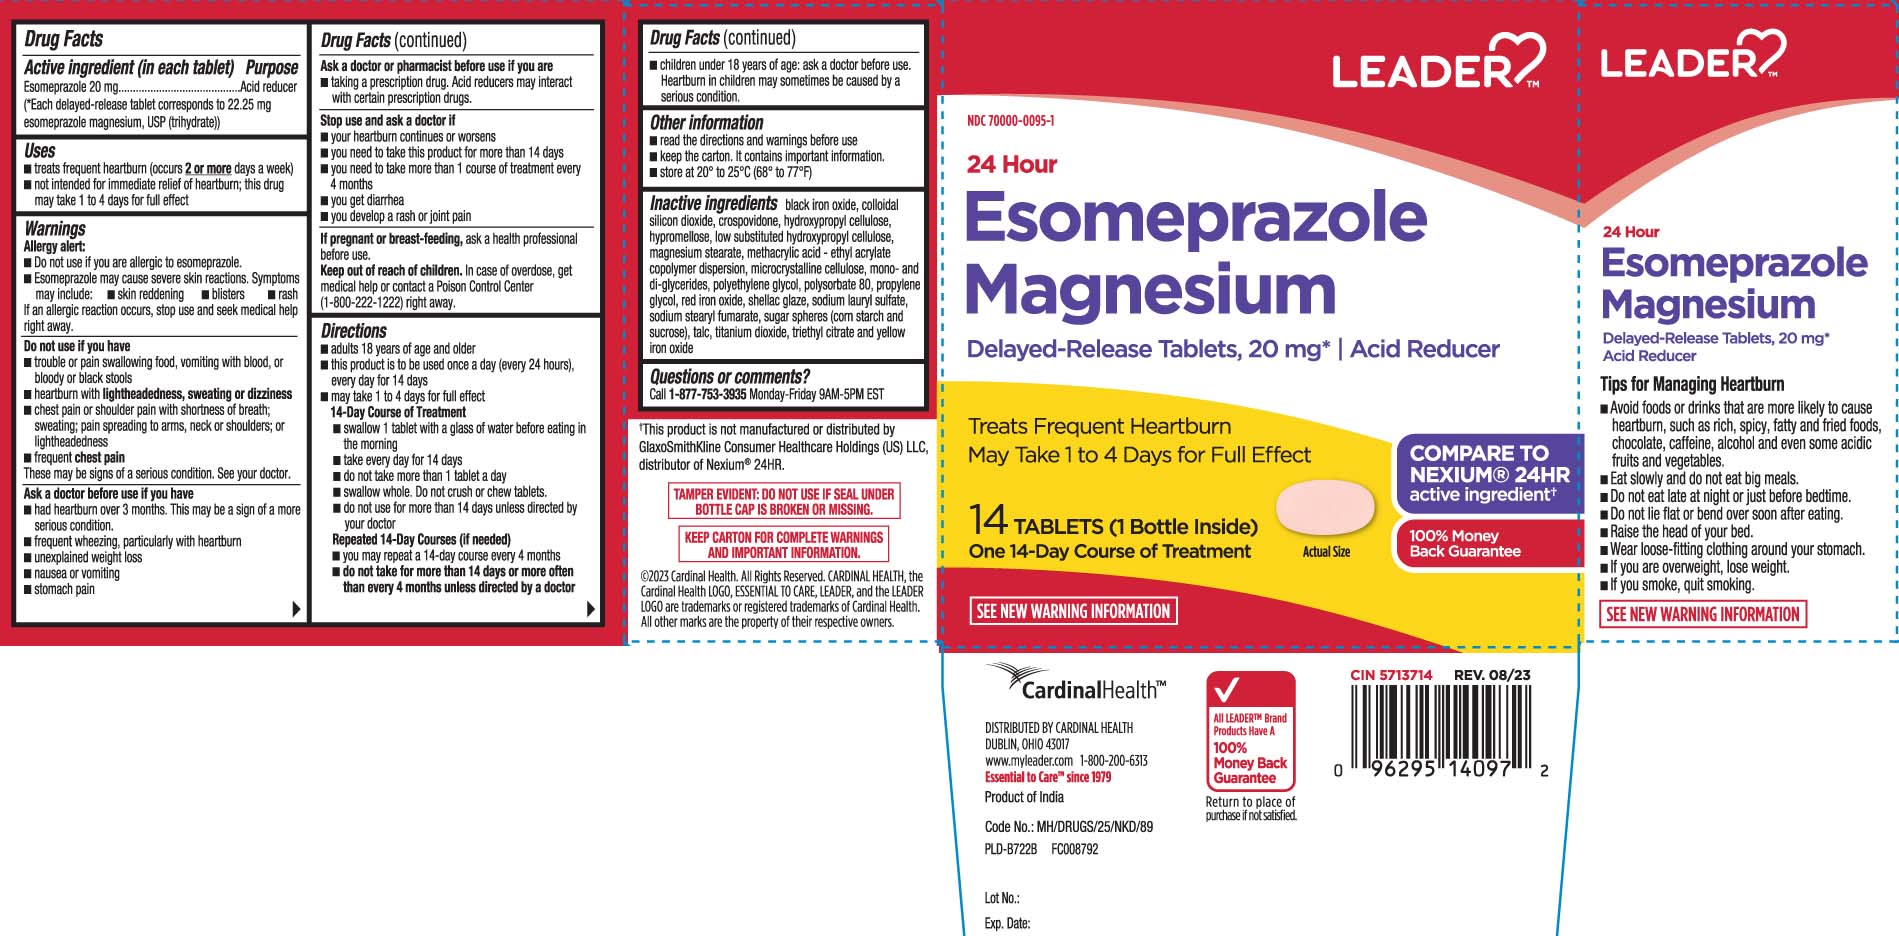 Esomeprazole 20 mg (*Each delayed-release tablet corresponds to 22.25 mg esomeprazole magnesium, USP (trihydrate))